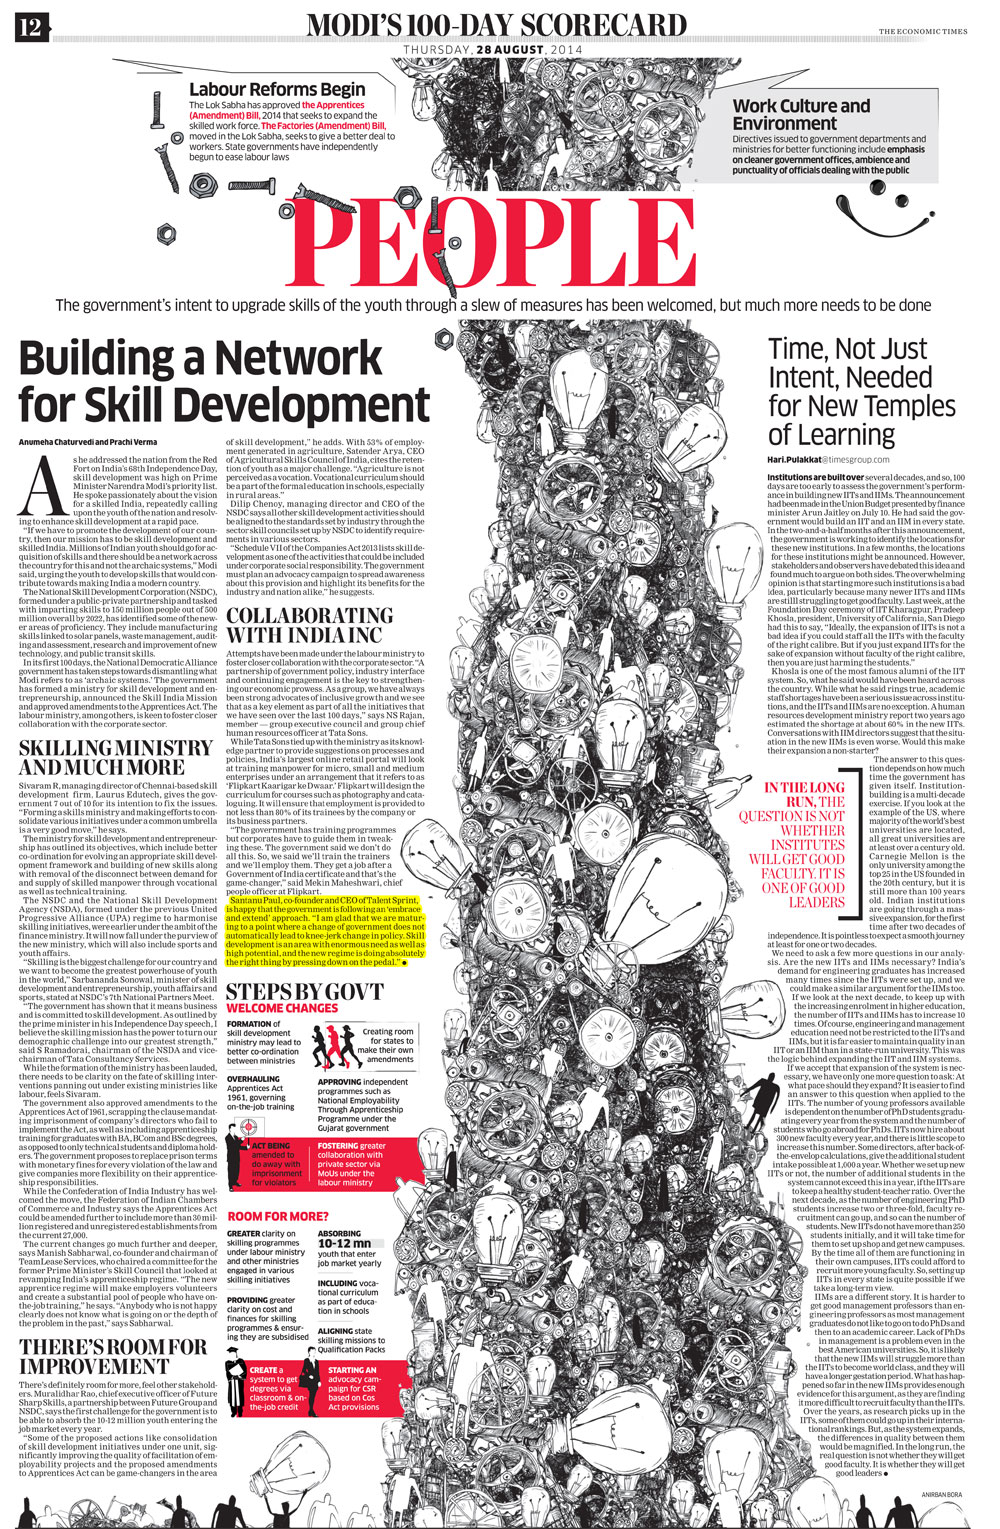 Building a Network for Skill Development